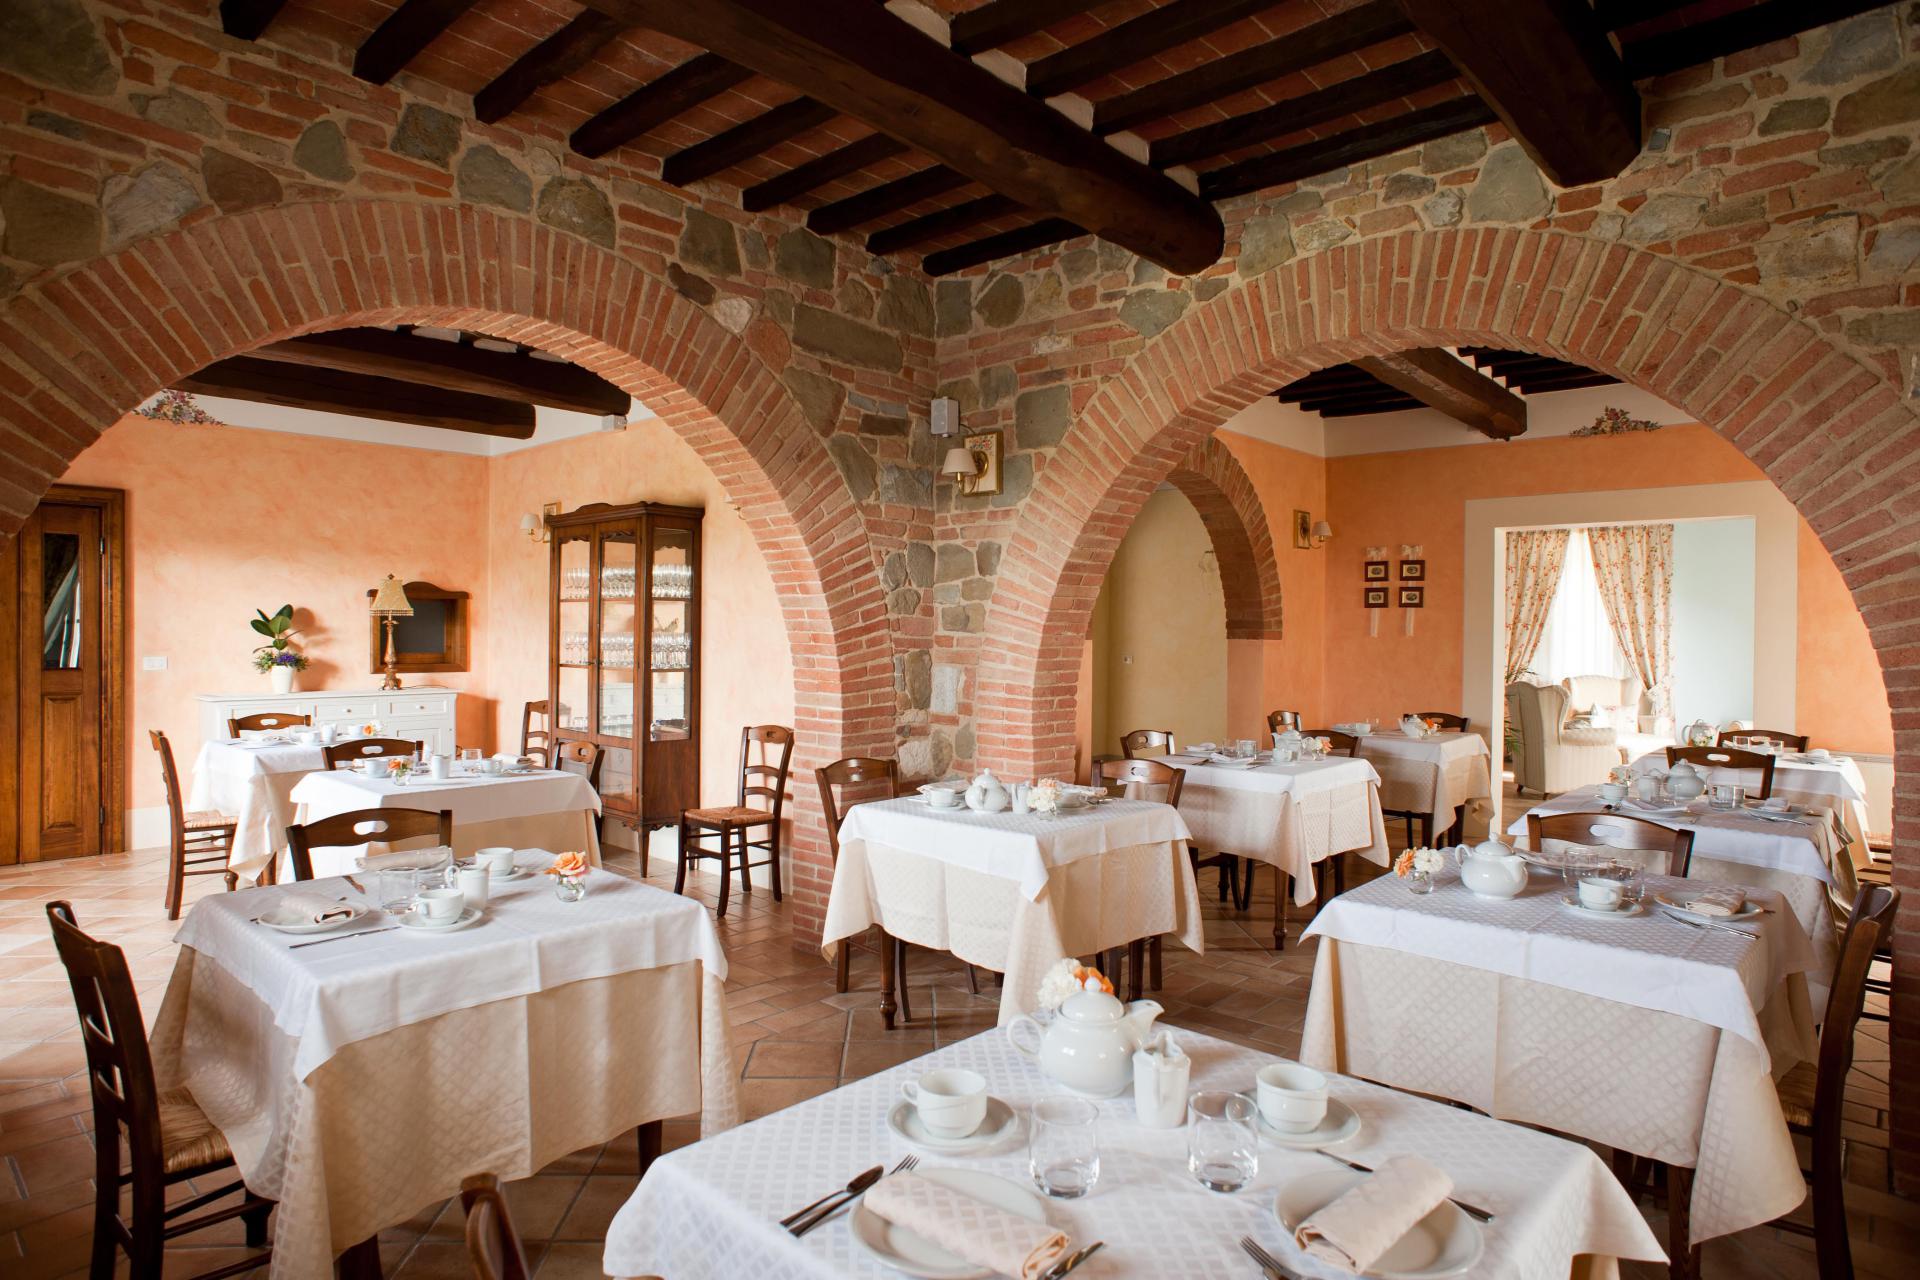 Agriturismo with breathtaking view and good restaurant